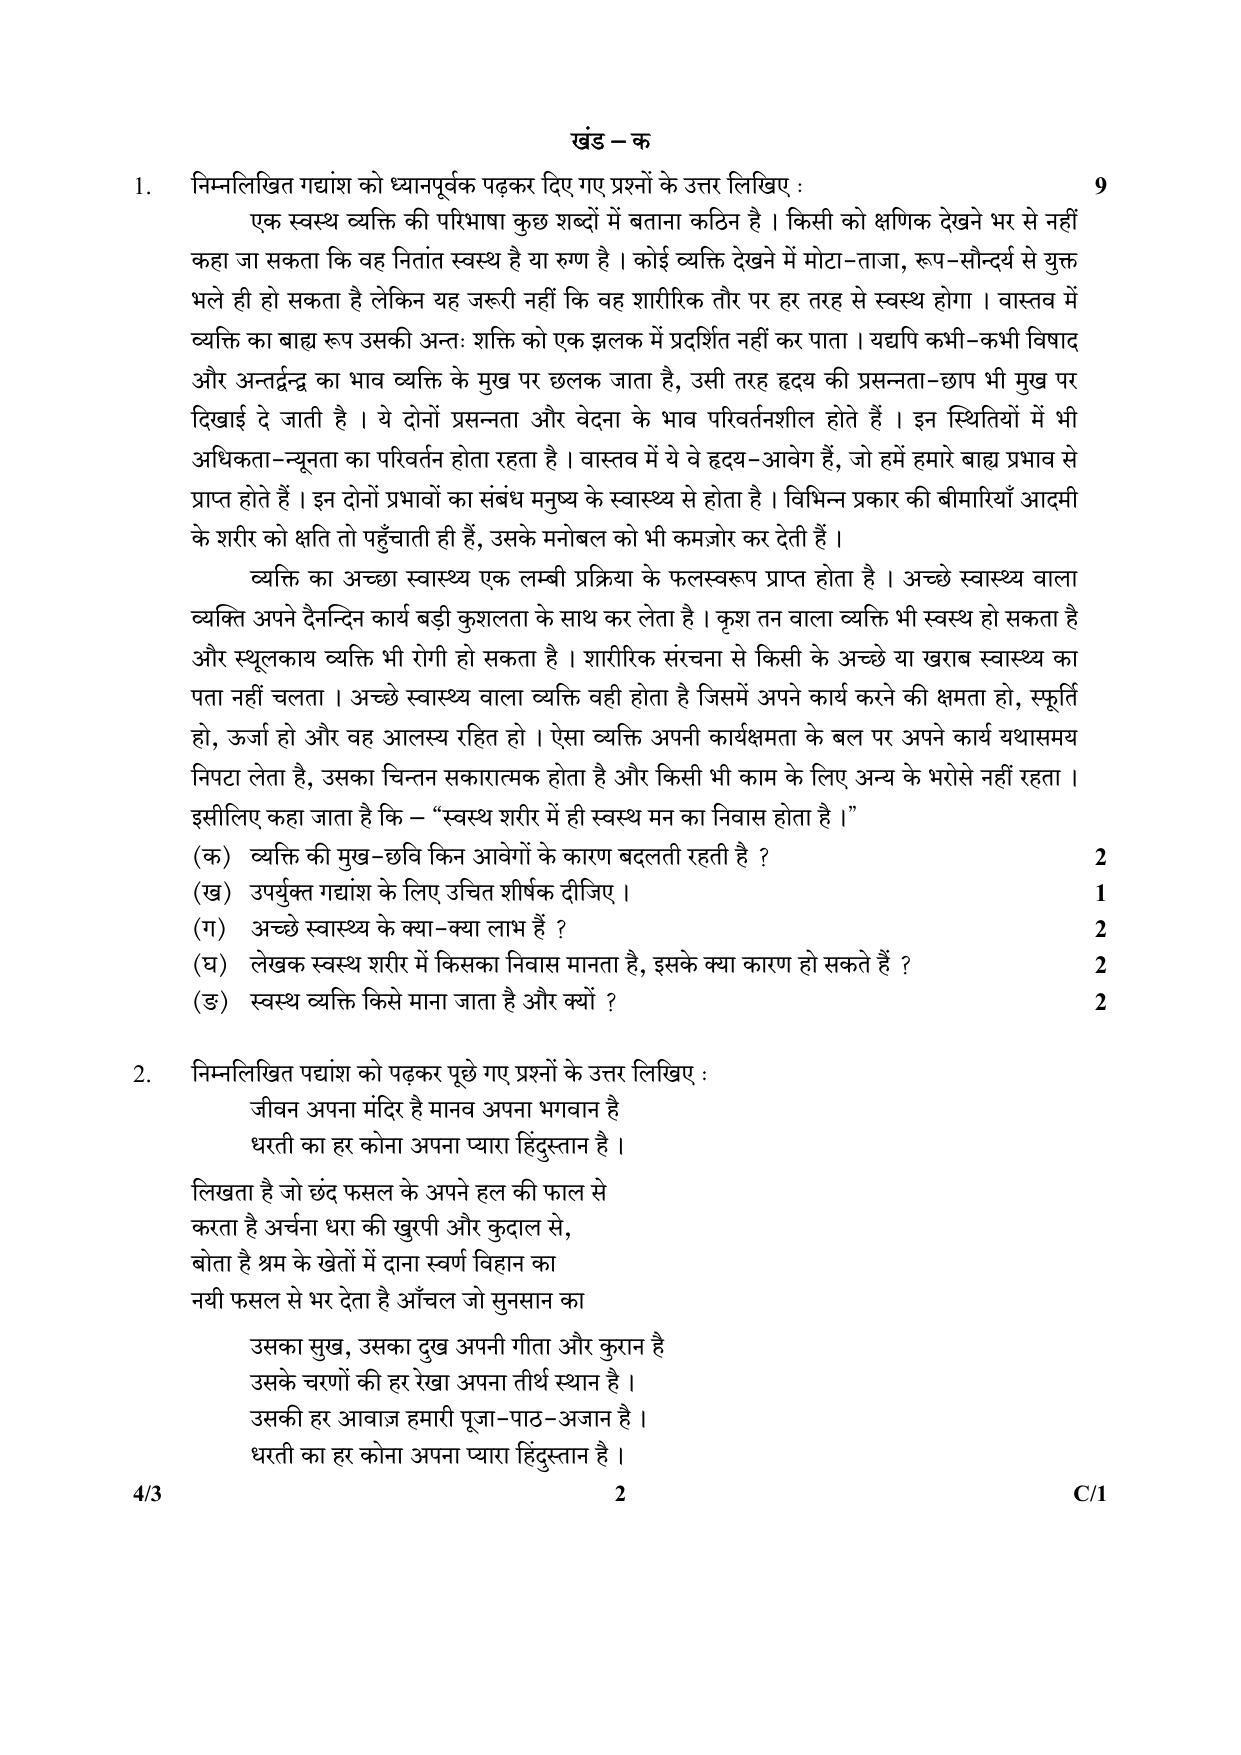 CBSE Class 10 4-3_Hindi 2018 Compartment Question Paper - Page 2